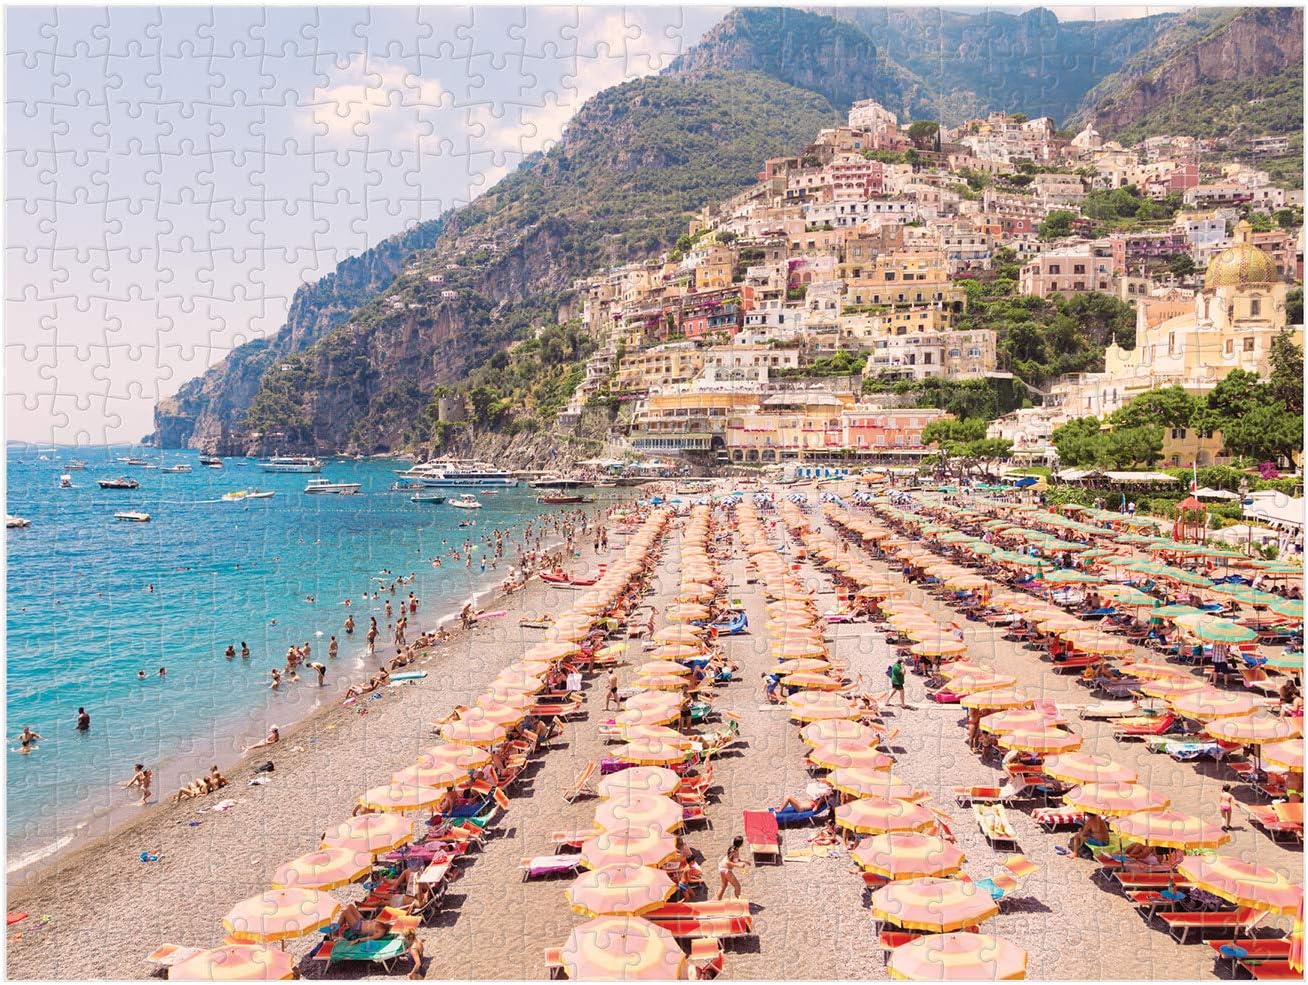 Galison Gray Malin Italy Two-Sided Jigsaw Puzzle